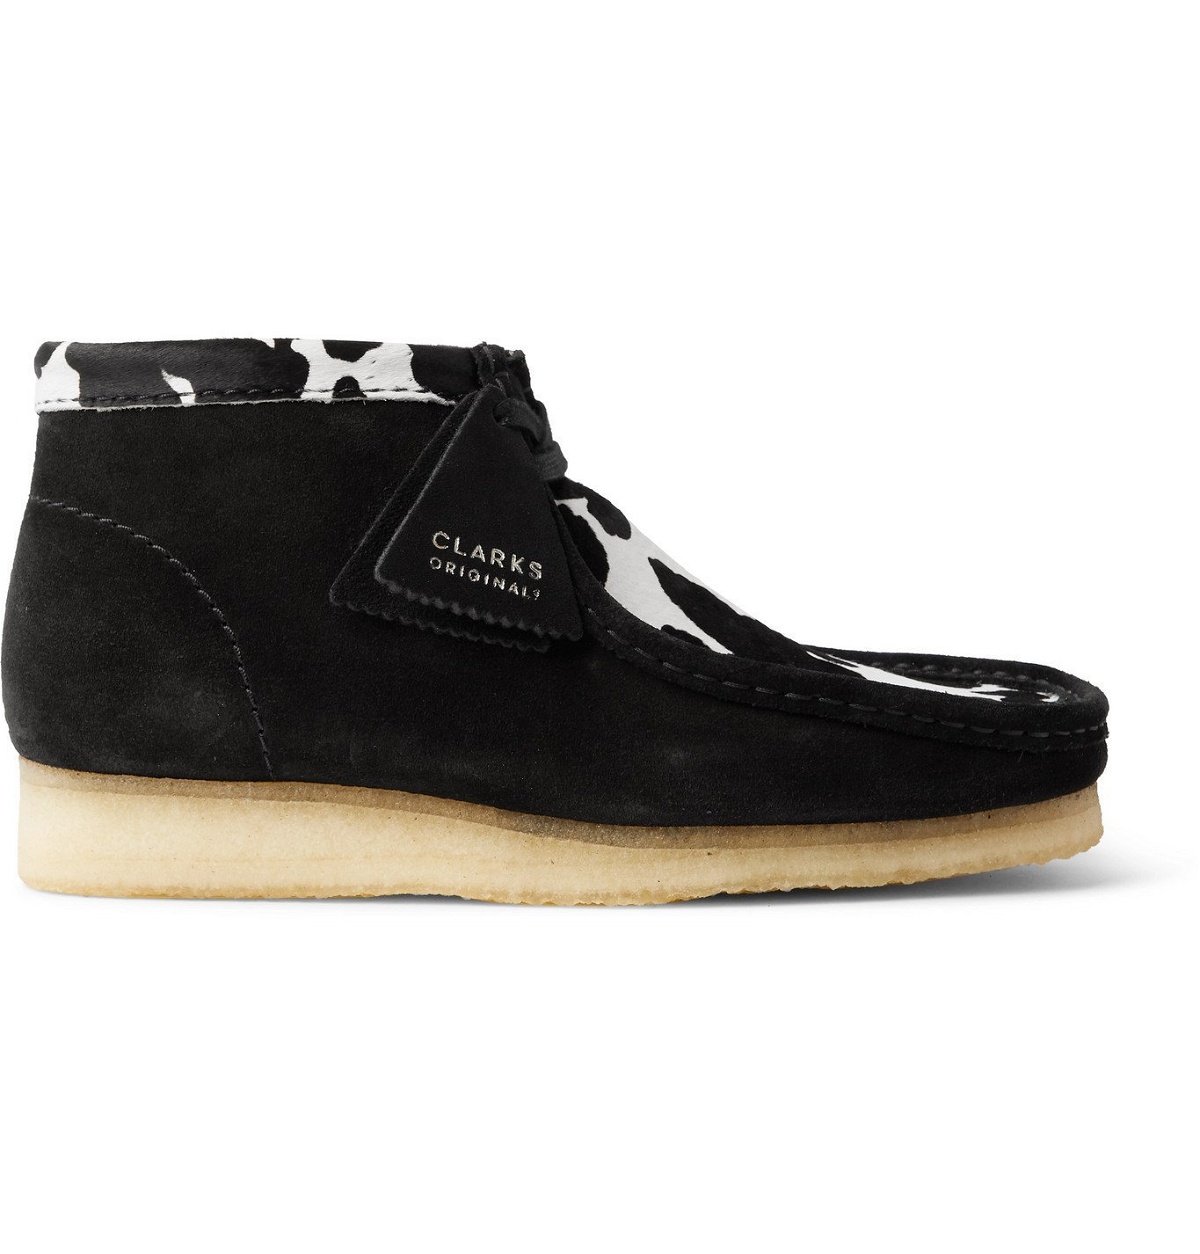 Clarks Originals - Wallabee Suede and Cow-Print Faux Pony Hair Desert ...